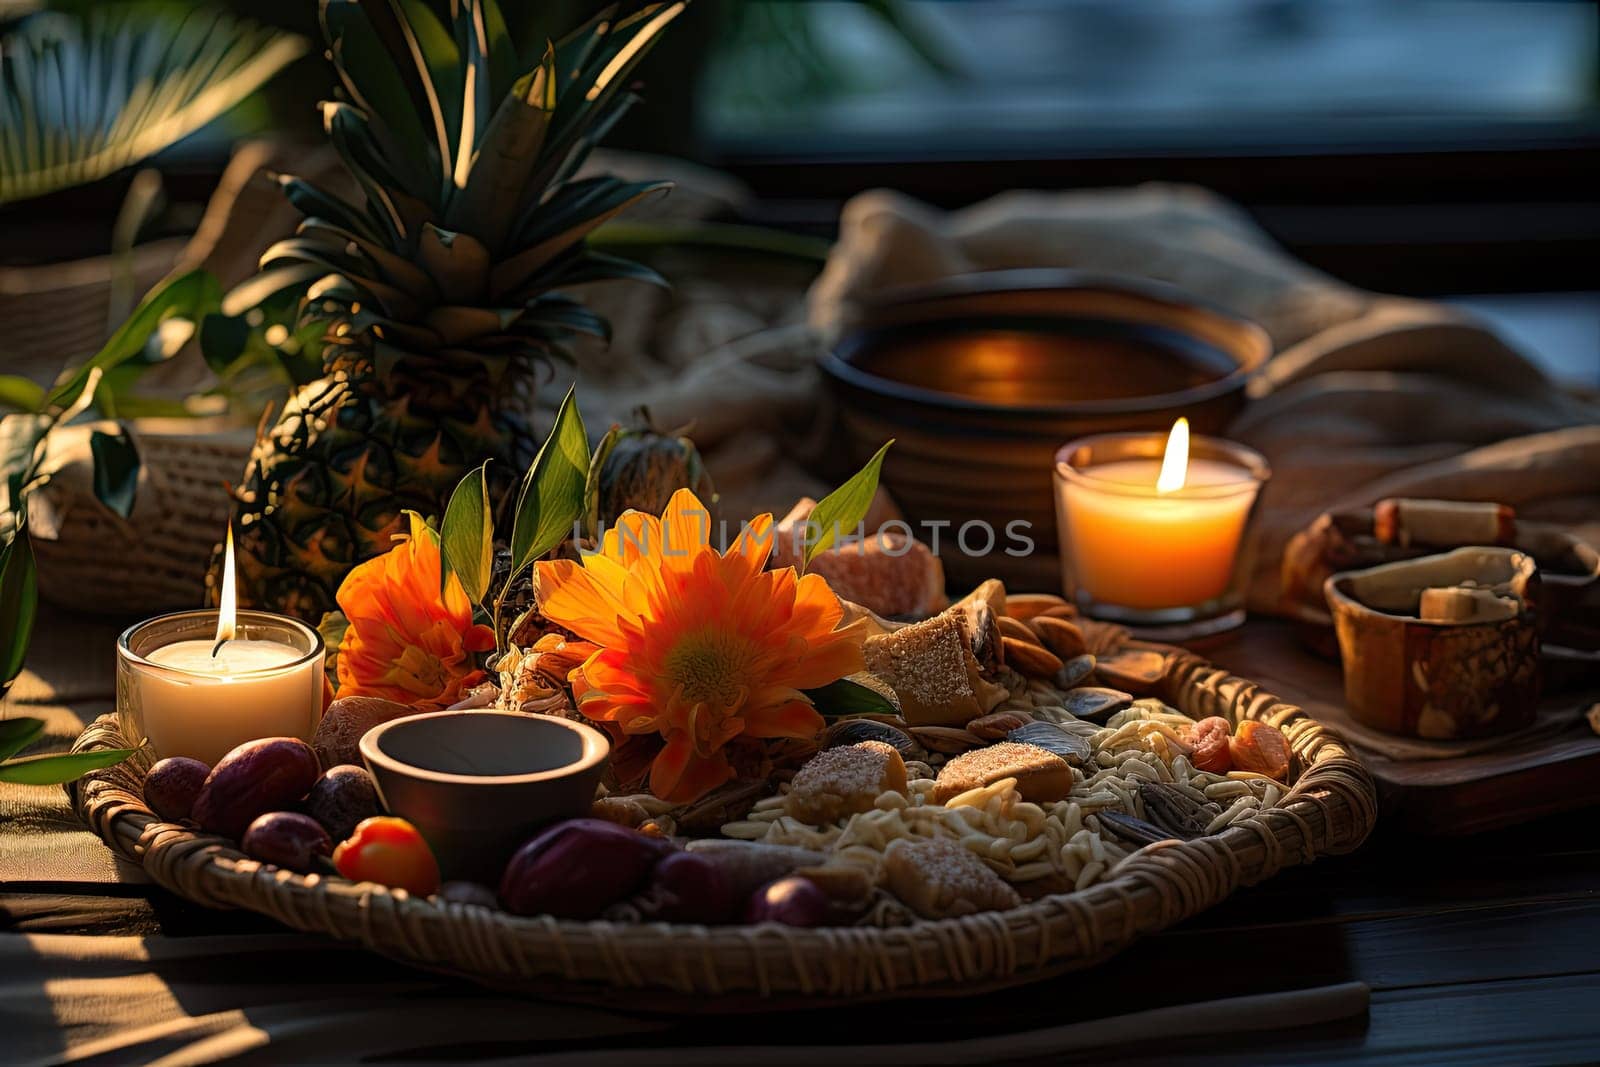 A Romantic Dinner Setting: Tray of Food with Candles and Flowers Created With Generative AI Technology